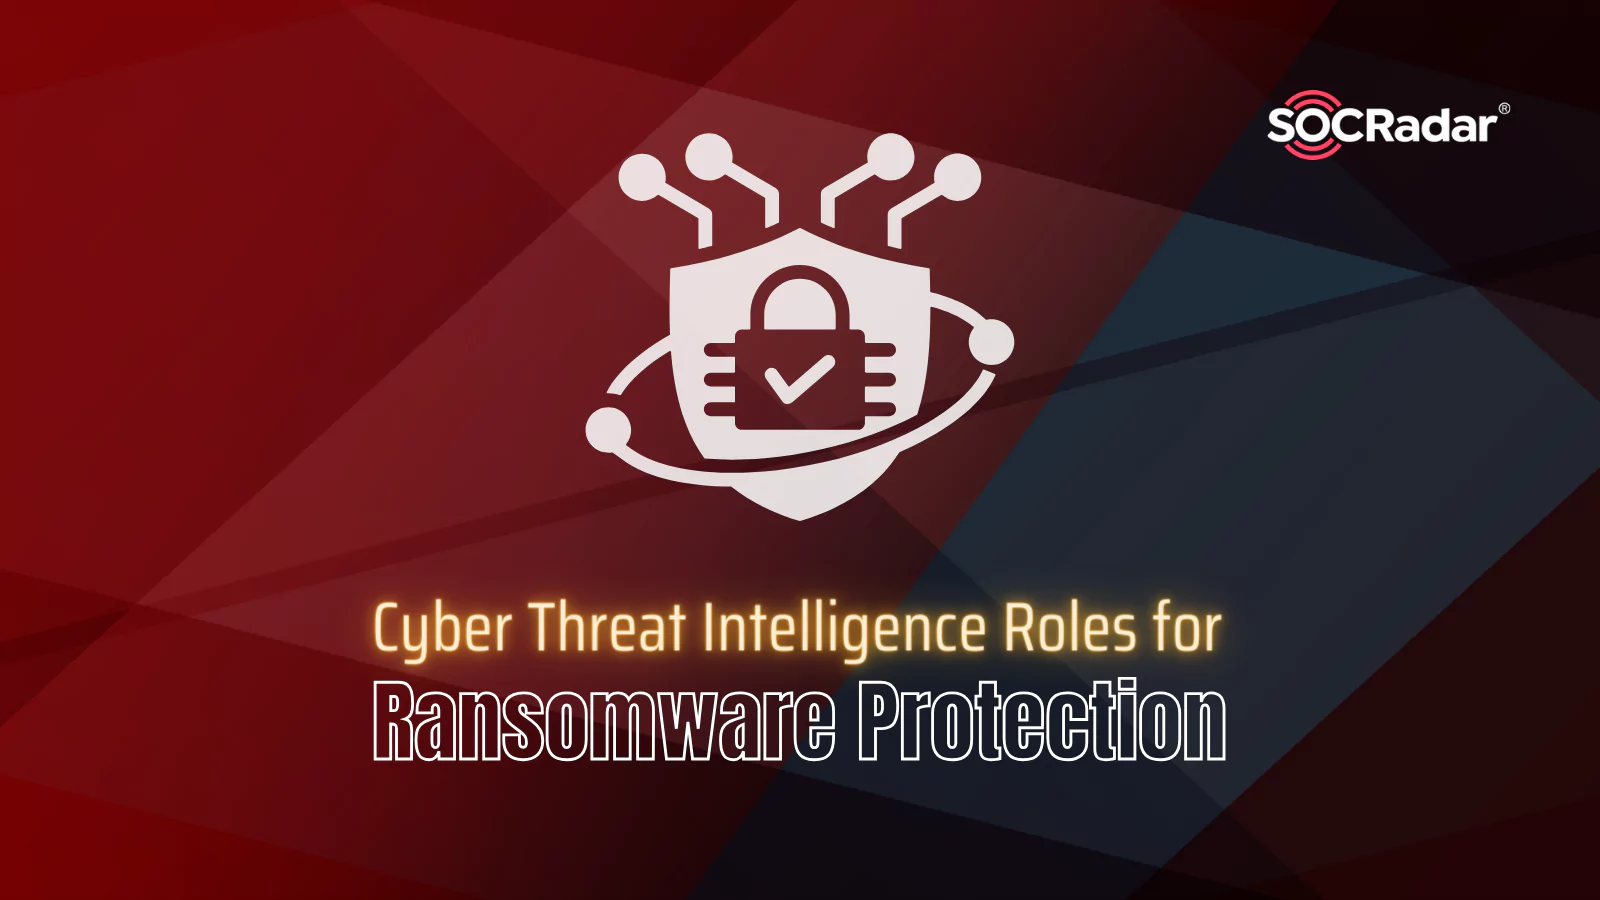 SOCRadar® Cyber Intelligence Inc. | Cyber Threat Intelligence (CTI) Roles for Ransomware Protection